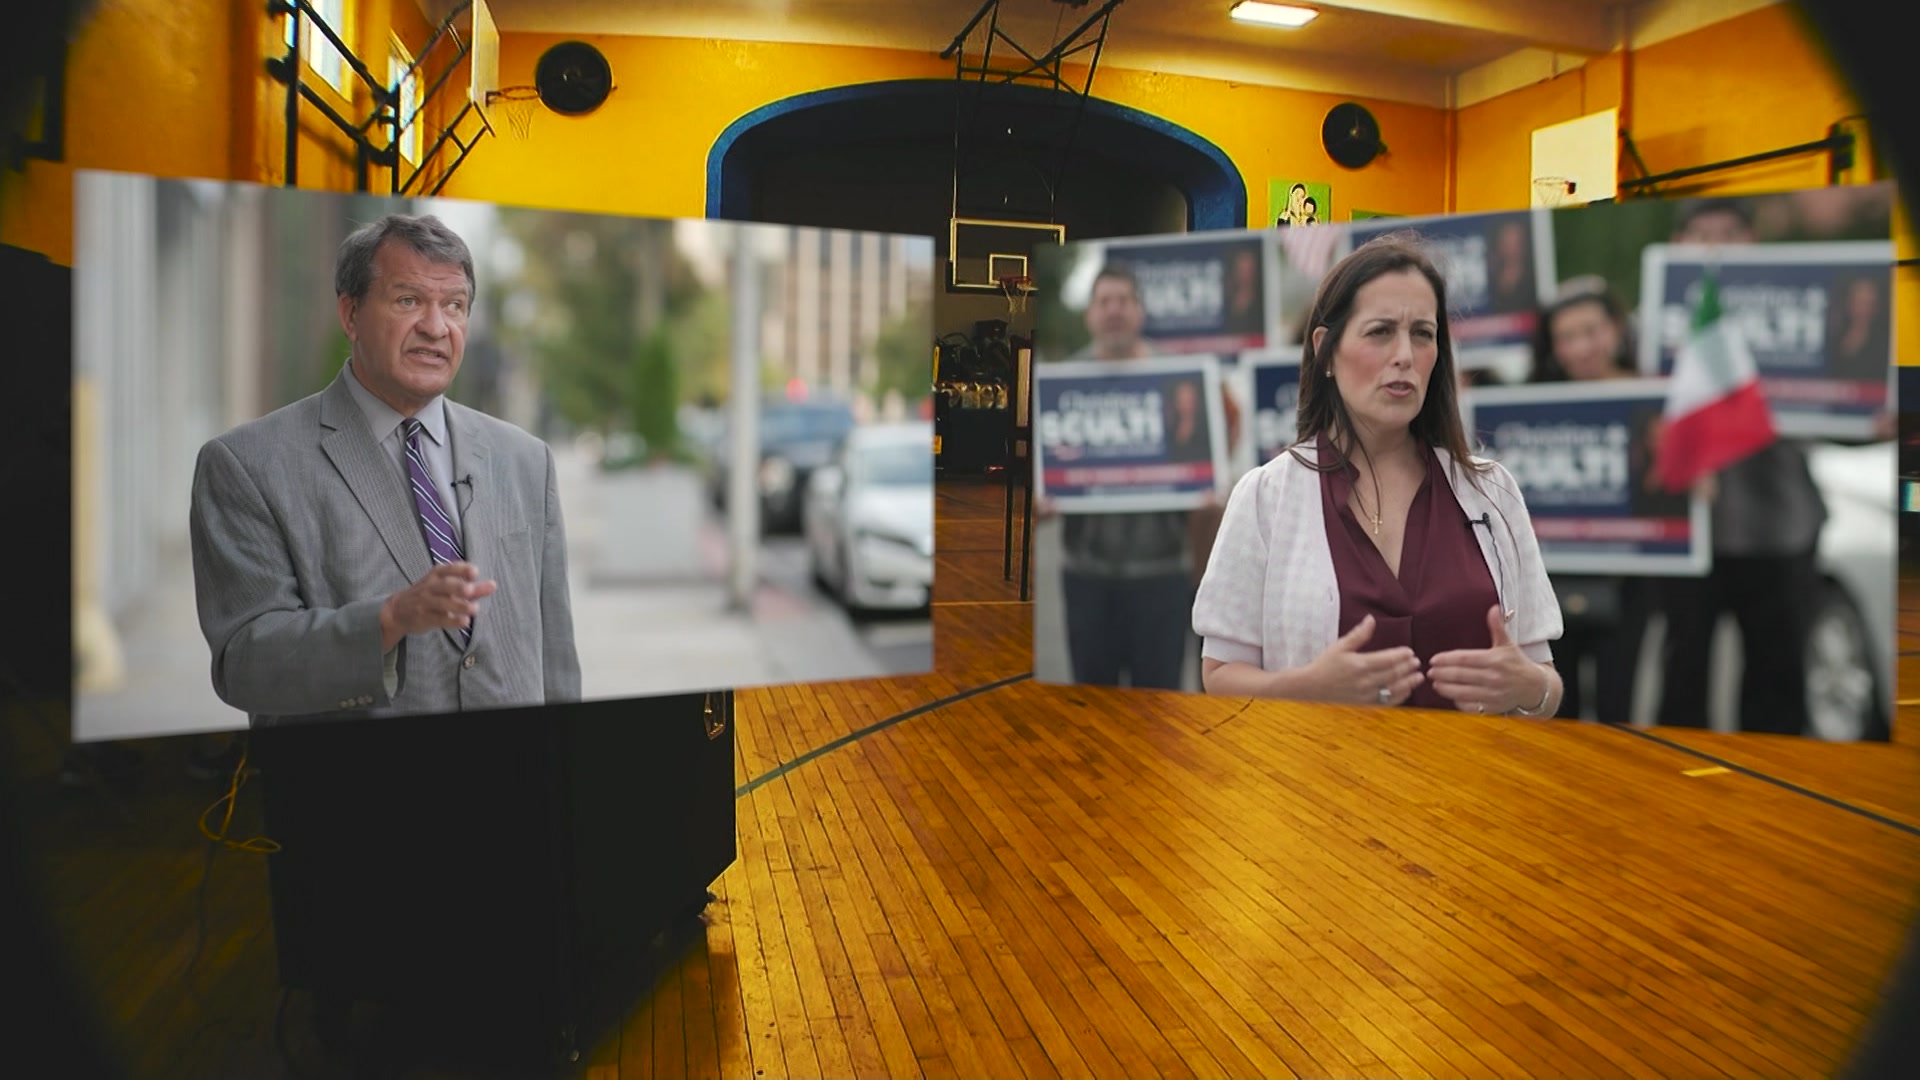 An upclose look at the Westchester county executive race ahead of